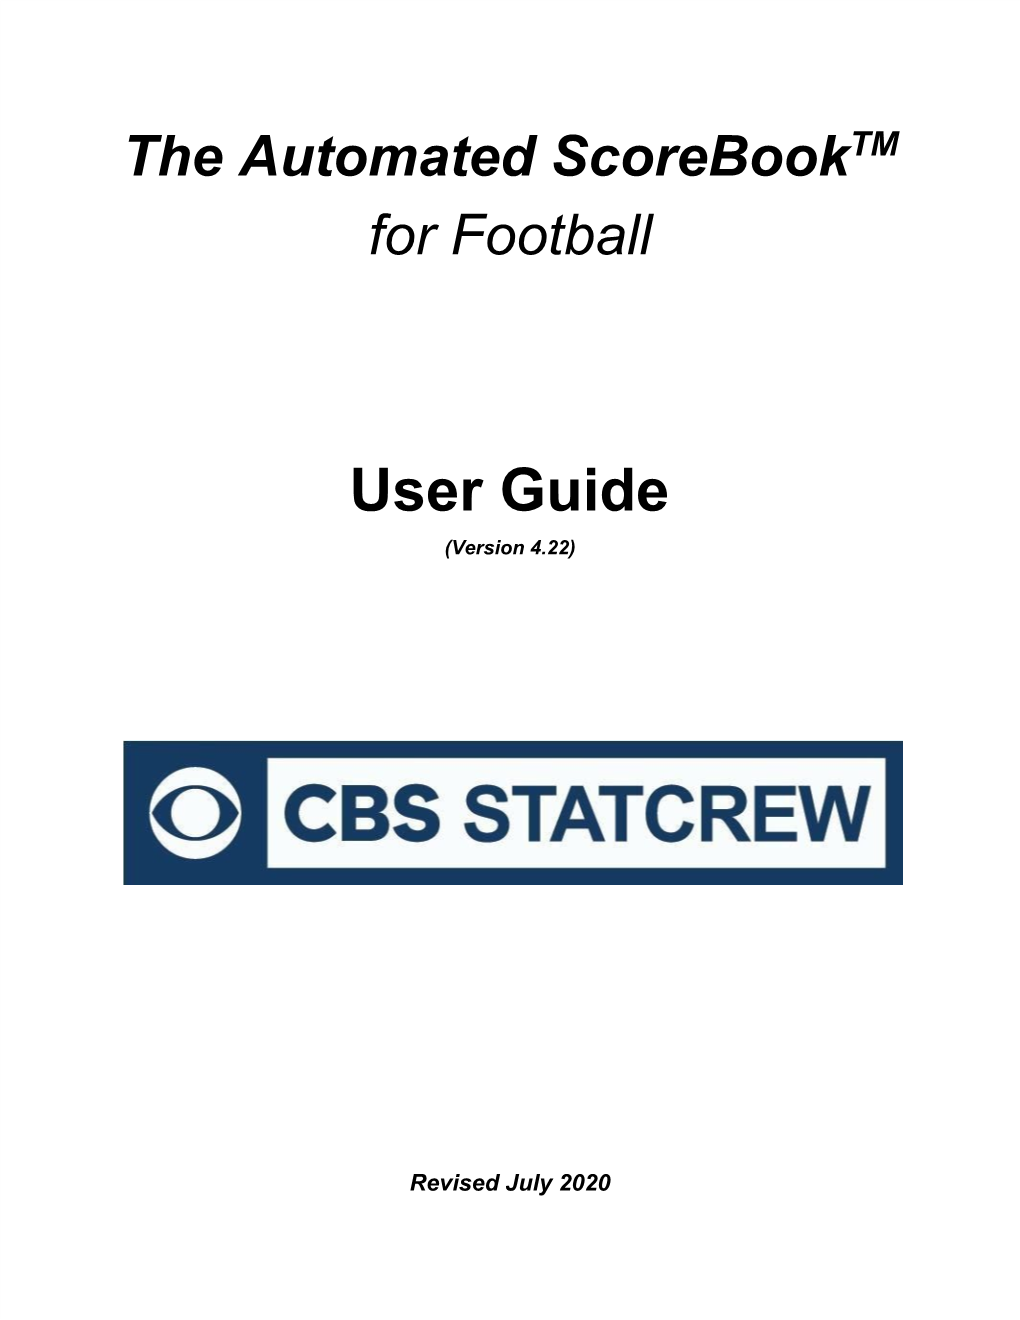 The Automated Scorebook​TM for Football